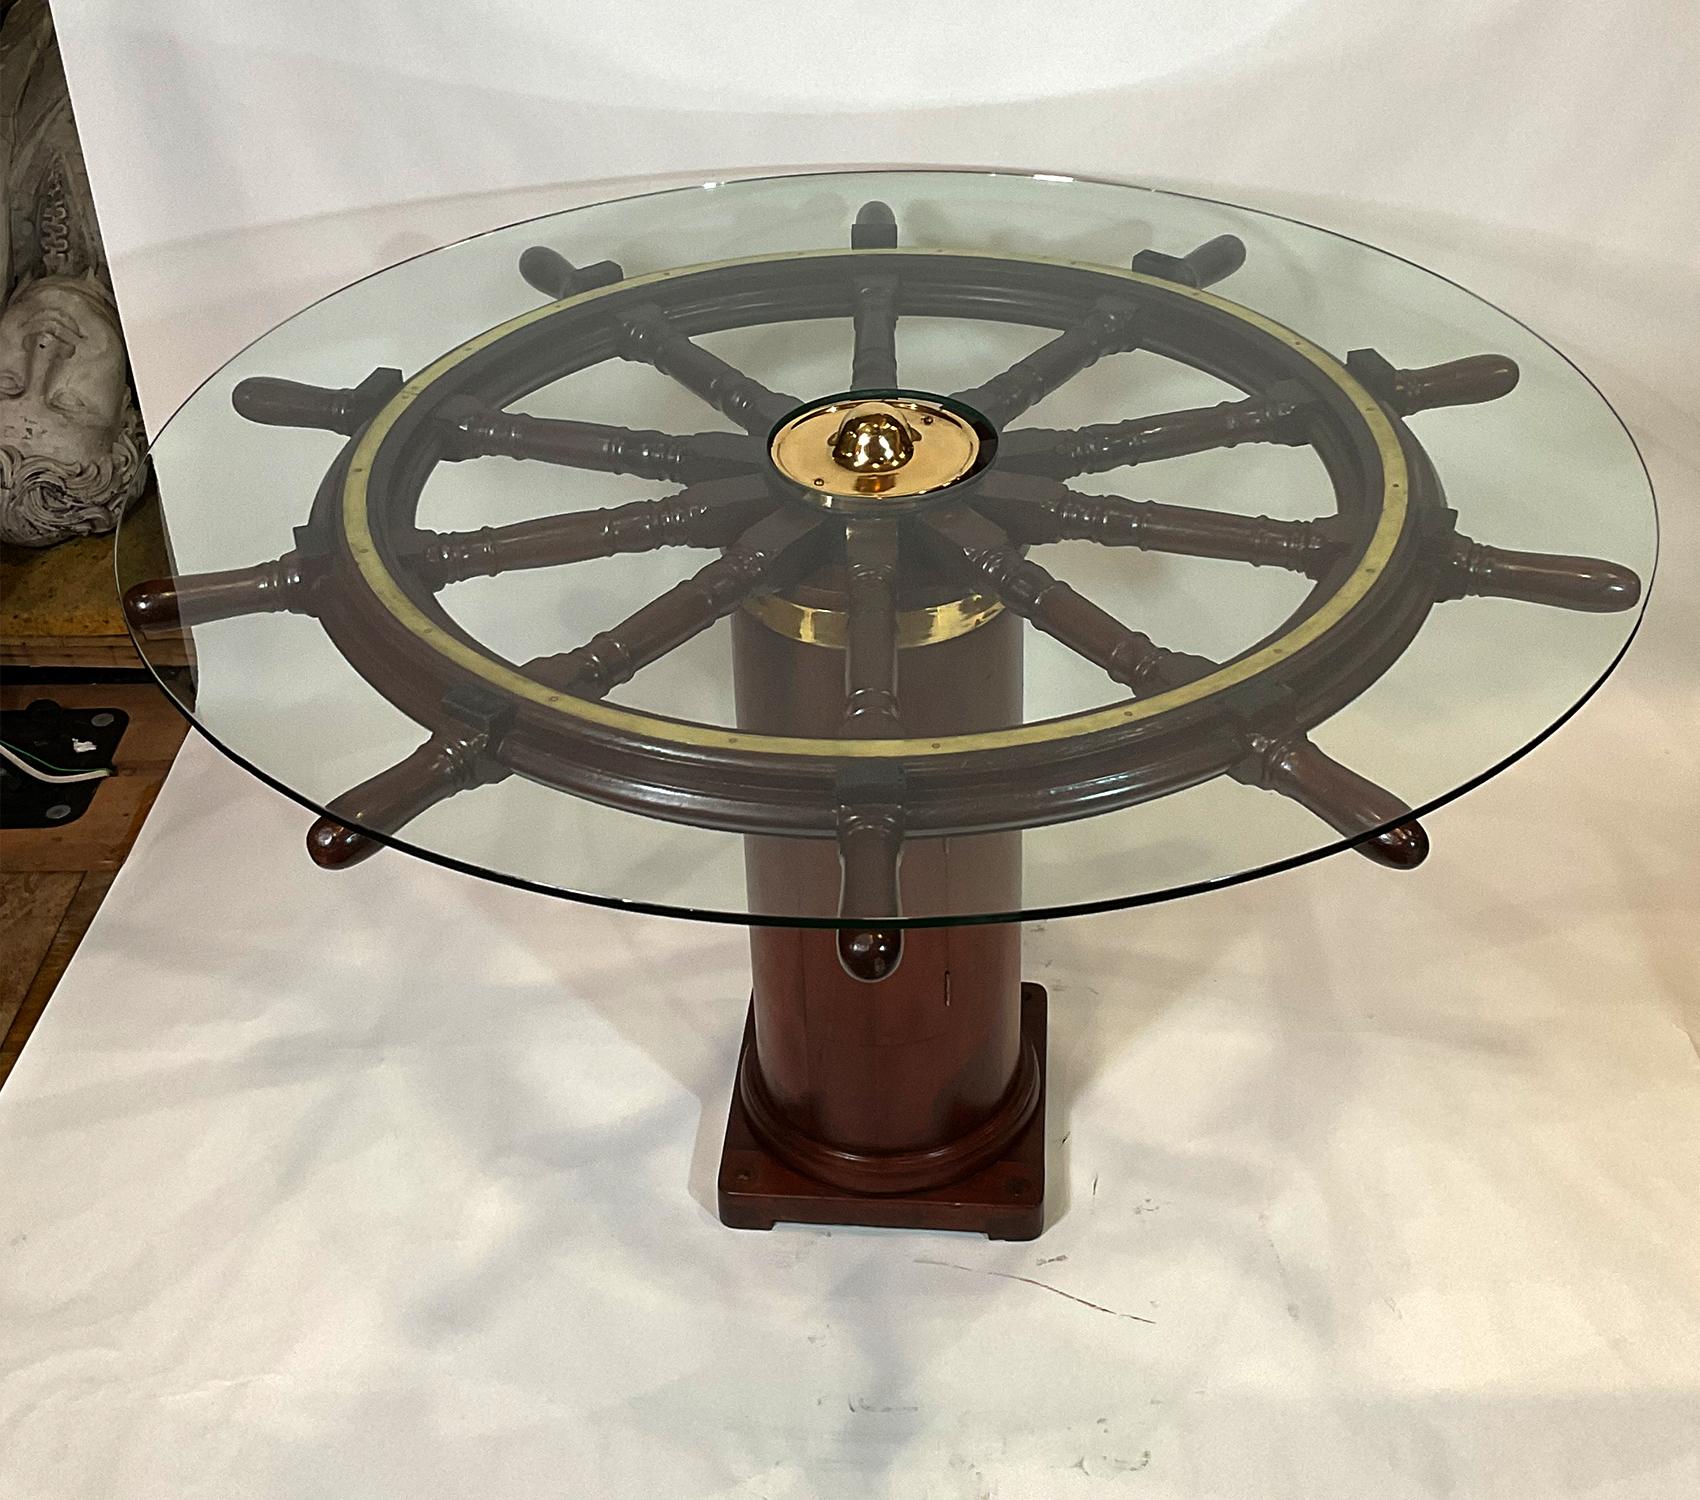 Nautical dining table created with an extraordinary antique ships wheel mounted to a ships binnacle base. The rare ships wheel is from the late Nineteenth Century and has been expertly refinished. The binnacle base with hinged door and brass band